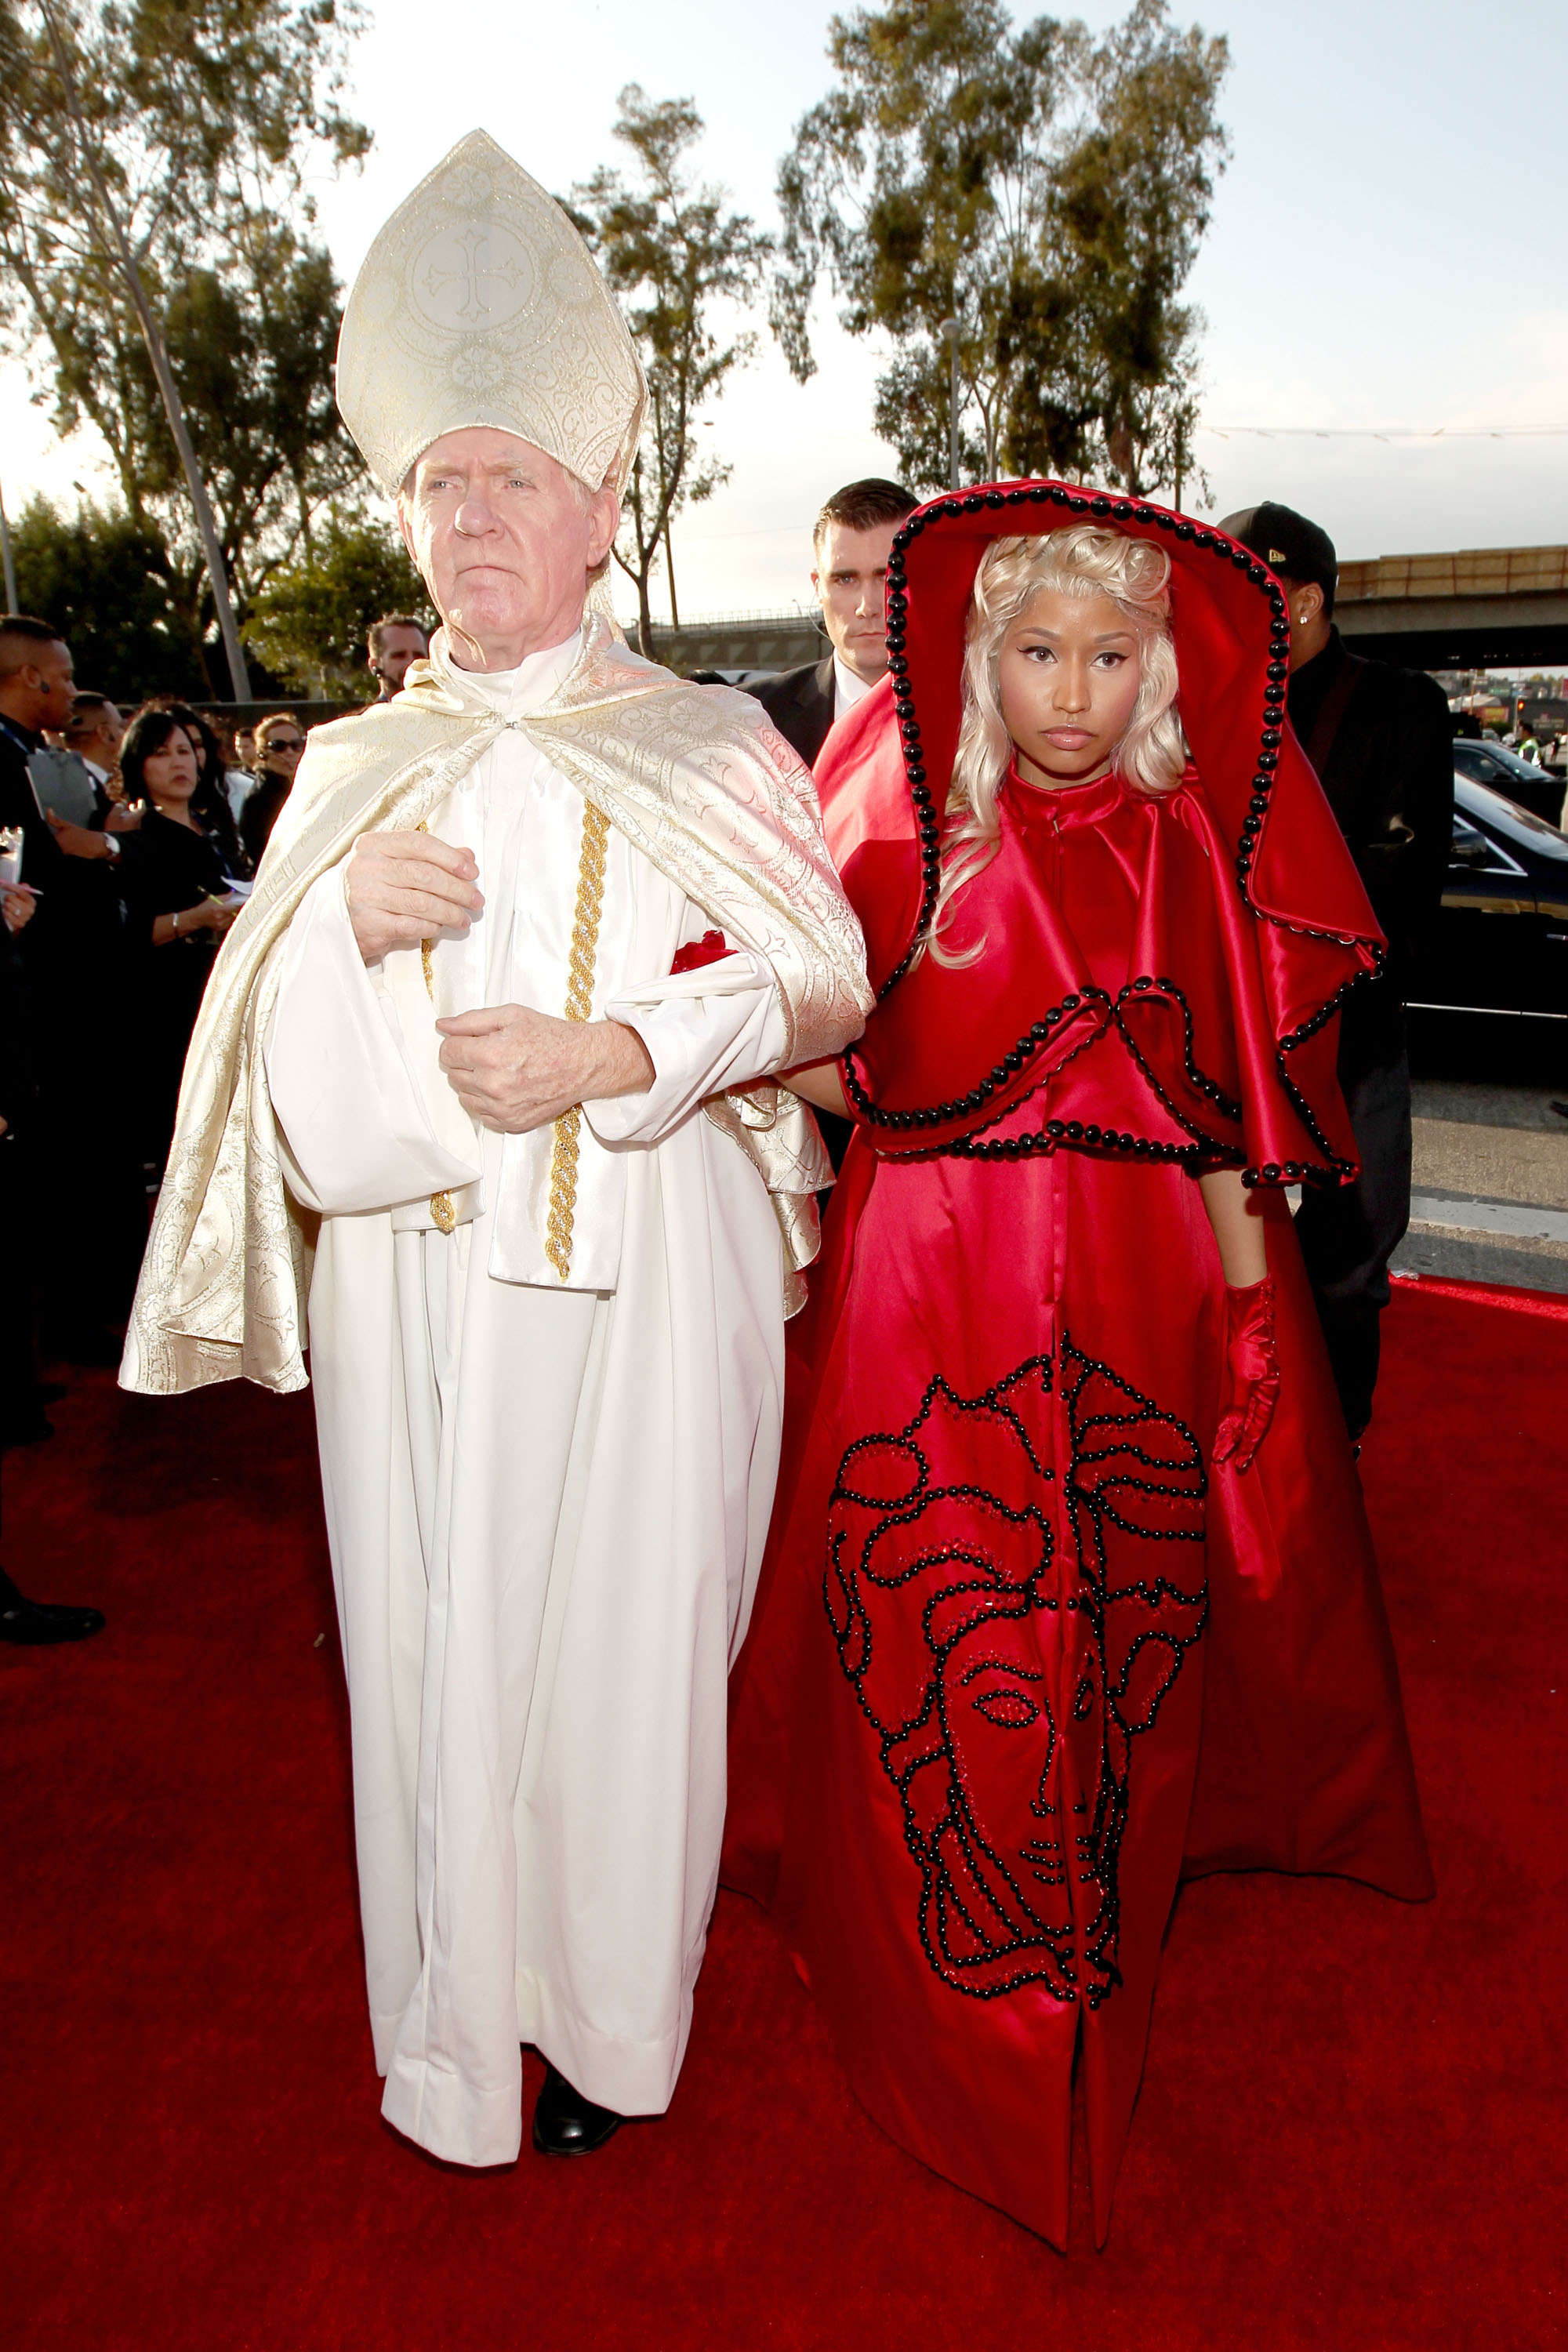 The 54th Annual GRAMMY Awards - Red Carpet